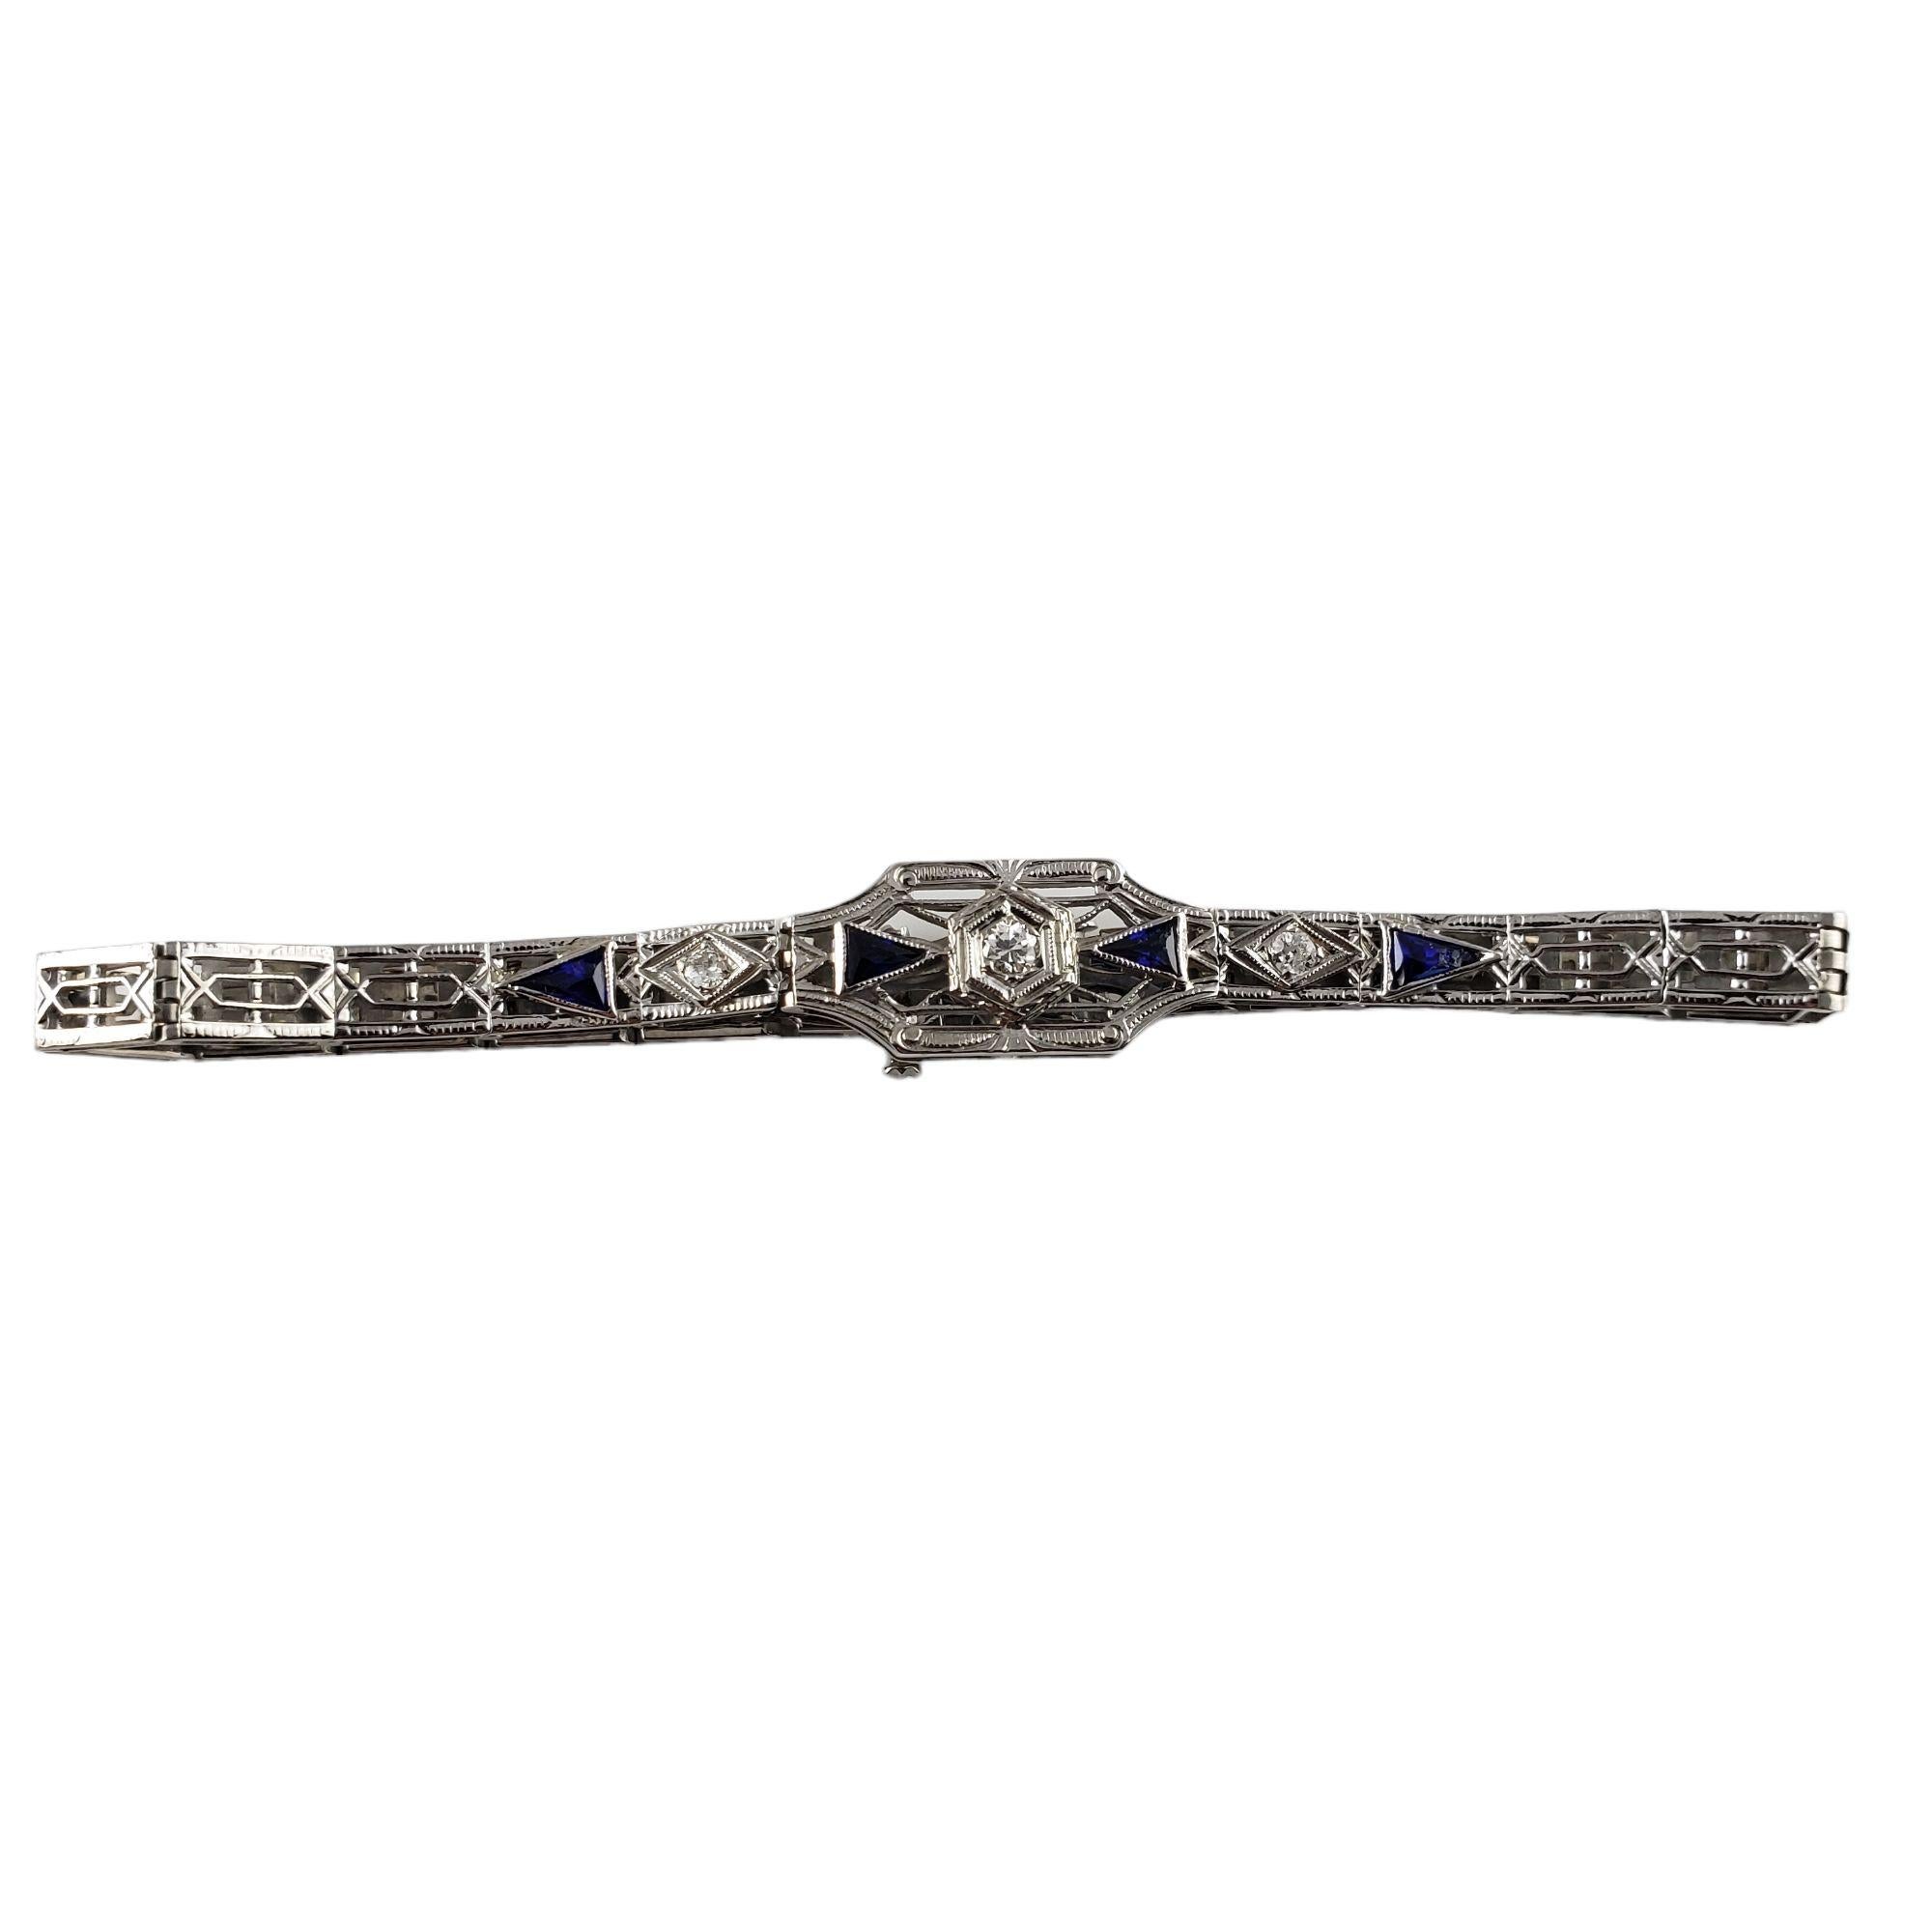 Vintage 18 Karat White Gold Filigree Diamond and Blue Glass Bracelet-

This stunning bracelet features four triangular blue glass pieces * and three round old mine cut diamonds ** set in beautifully detailed 18K white gold filigree.  Width:  10